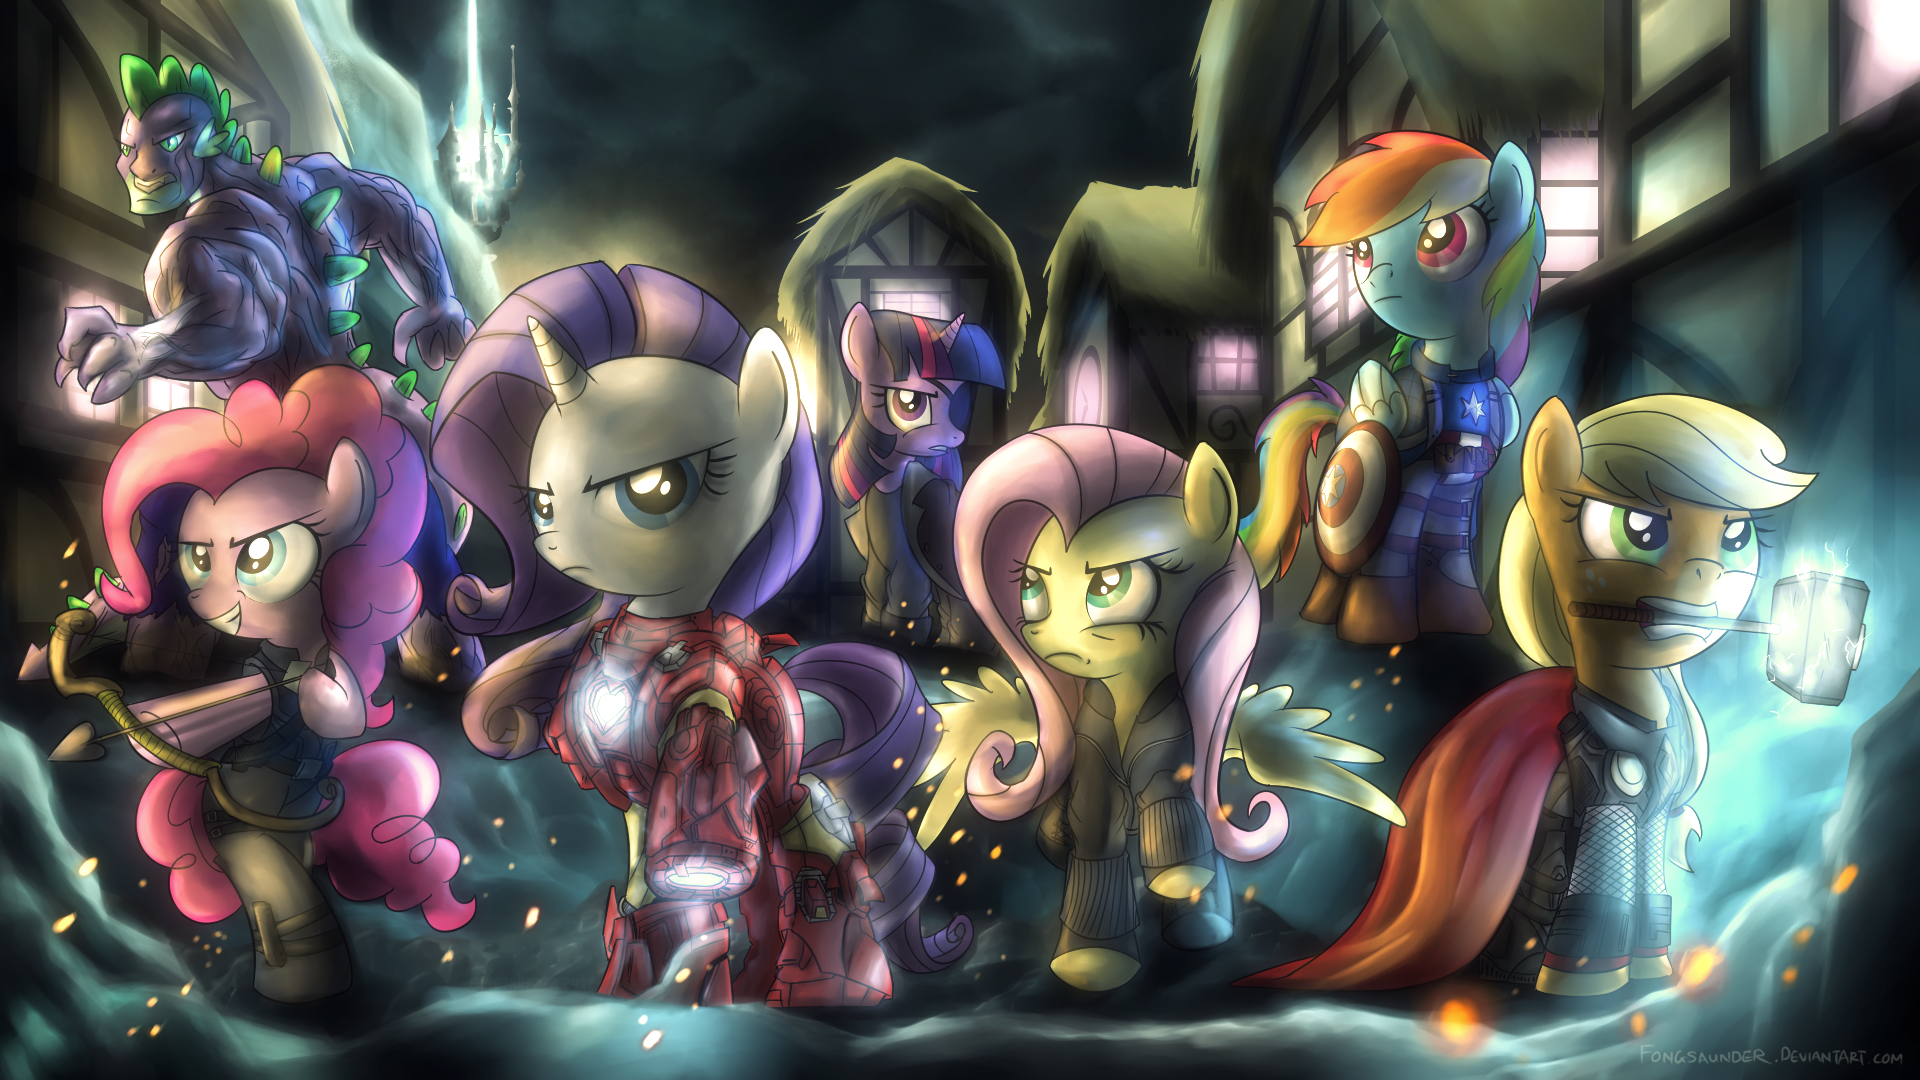 Mlp Mane Six Avengers Wallpaper 1080p From Shadow Of Death Hosted